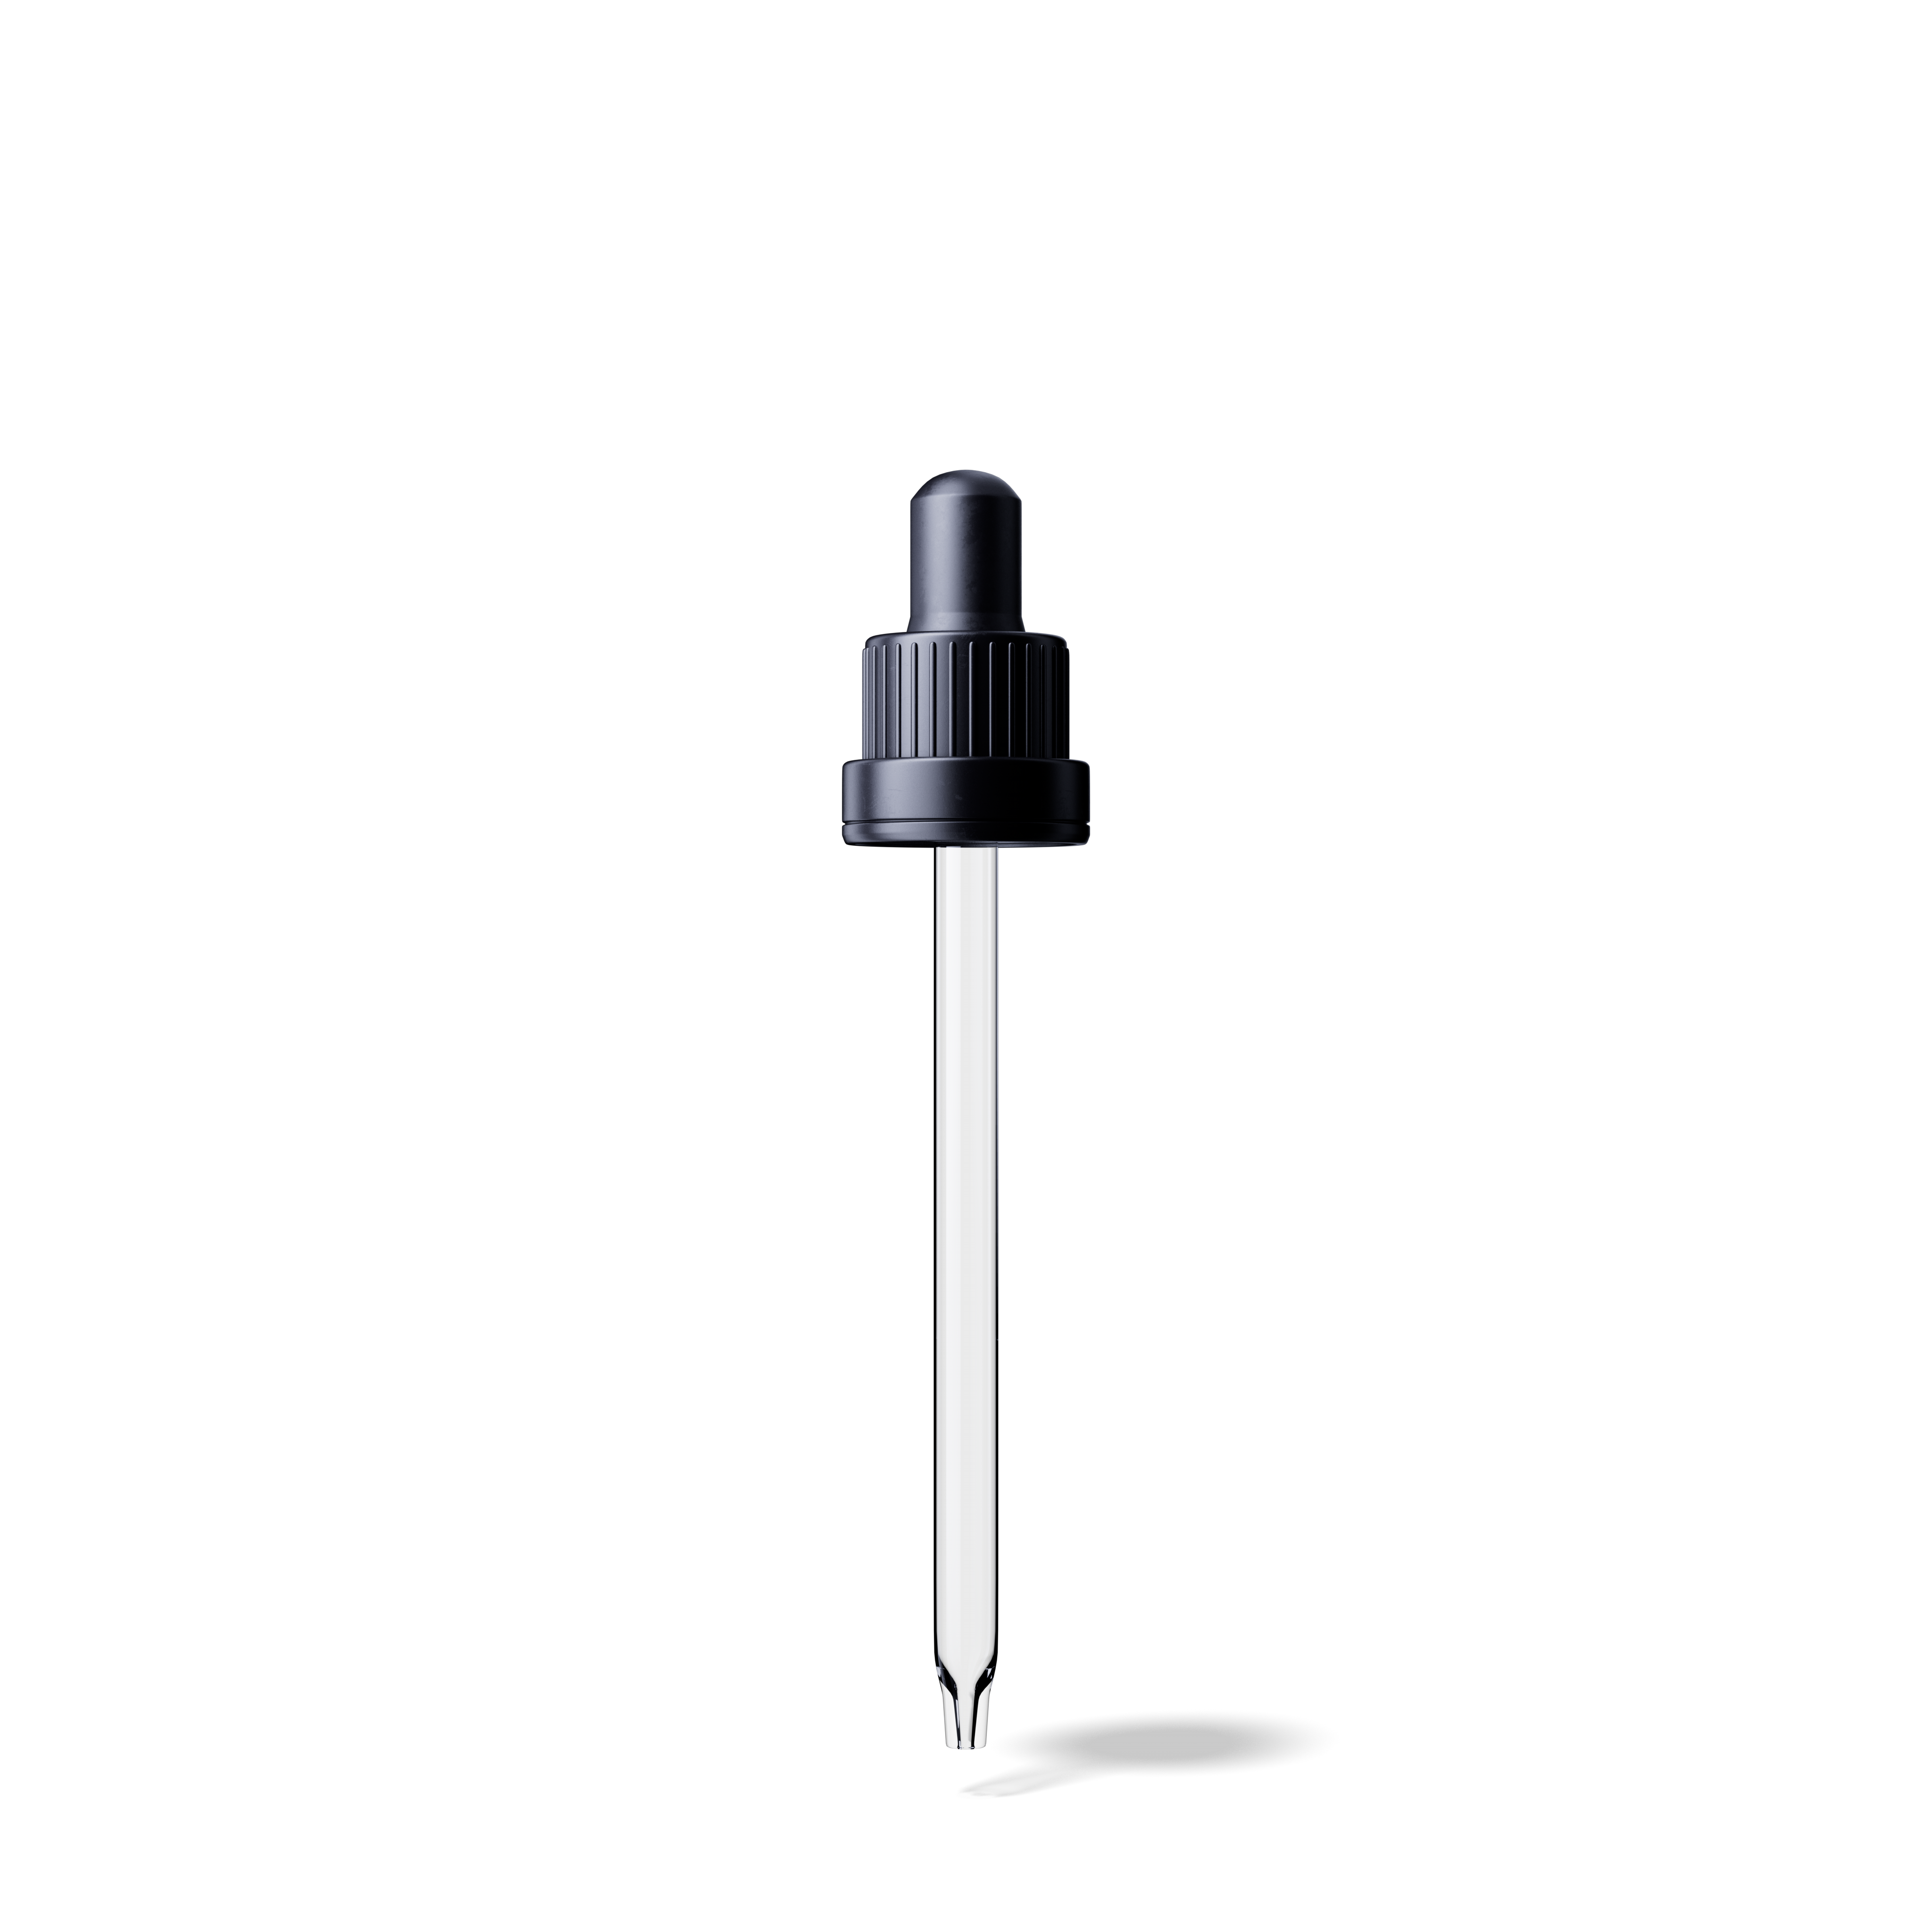 Pipette tamper evident DIN18, III, black, ribbed, bulb NBR, dose 0.7ml, conical tip (Orion 50)